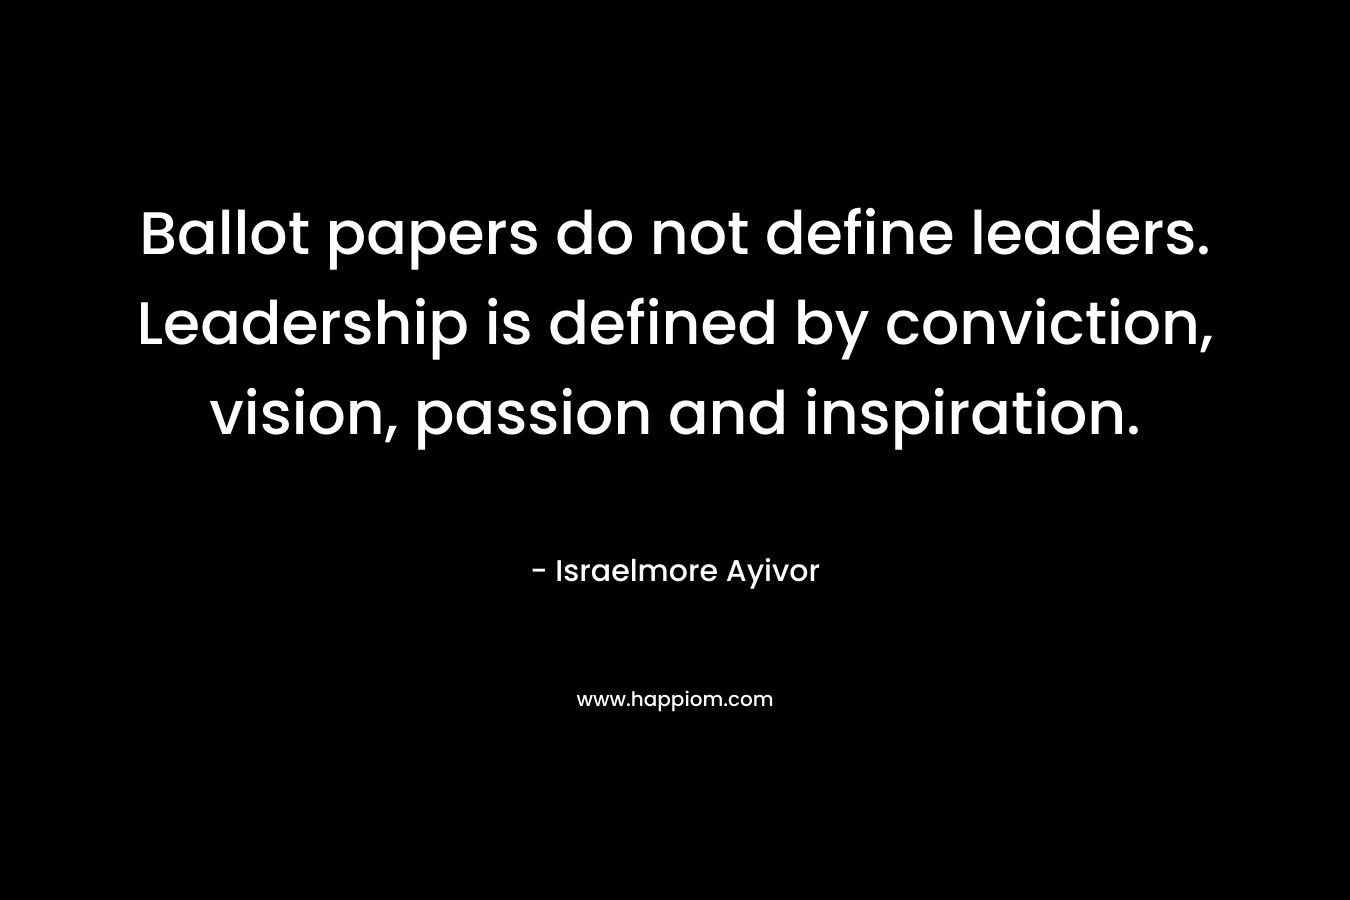 Ballot papers do not define leaders. Leadership is defined by conviction, vision, passion and inspiration.